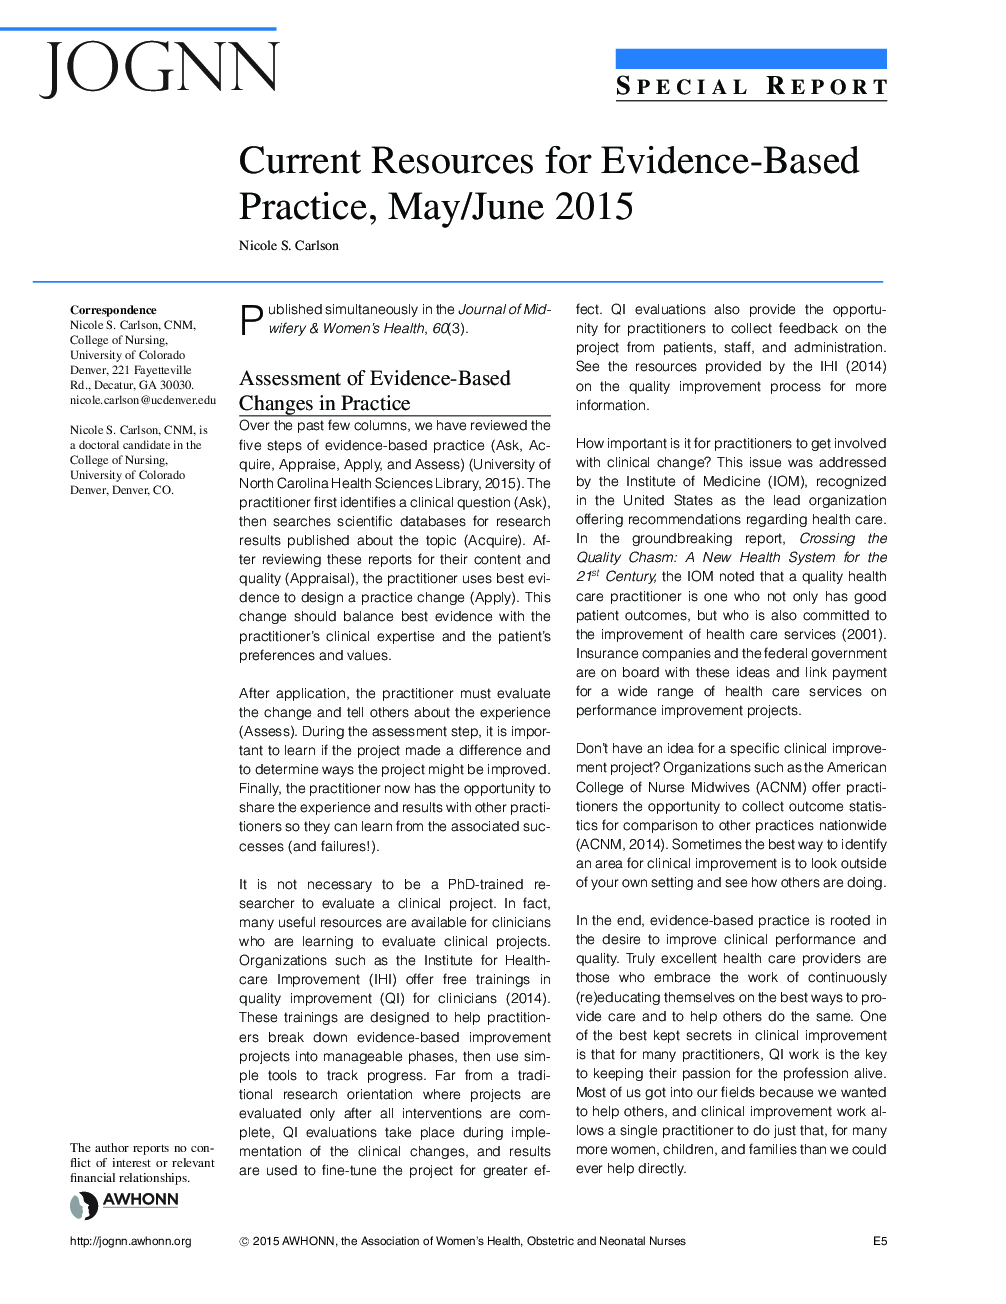 Current Resources for EvidenceâBased Practice, May/June 2015